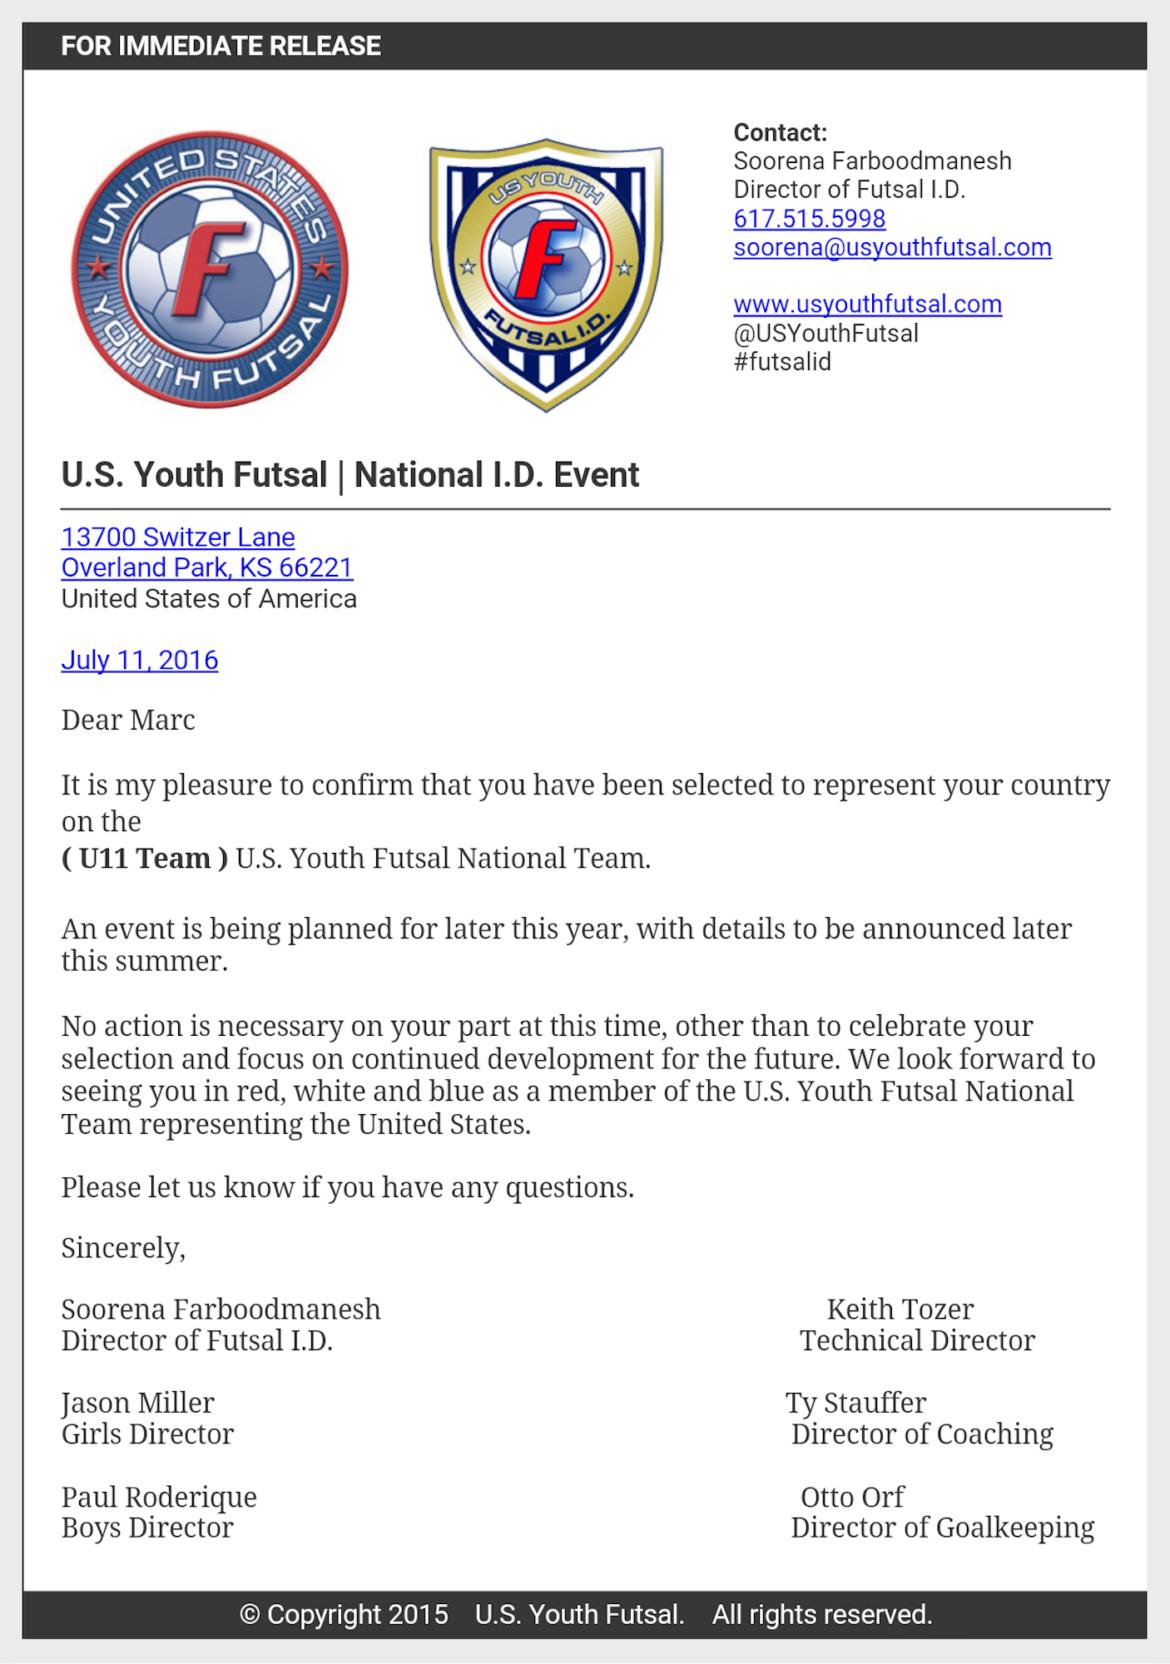 The letter inviting Marc Kim to participate in the Youth Futsal National Team.